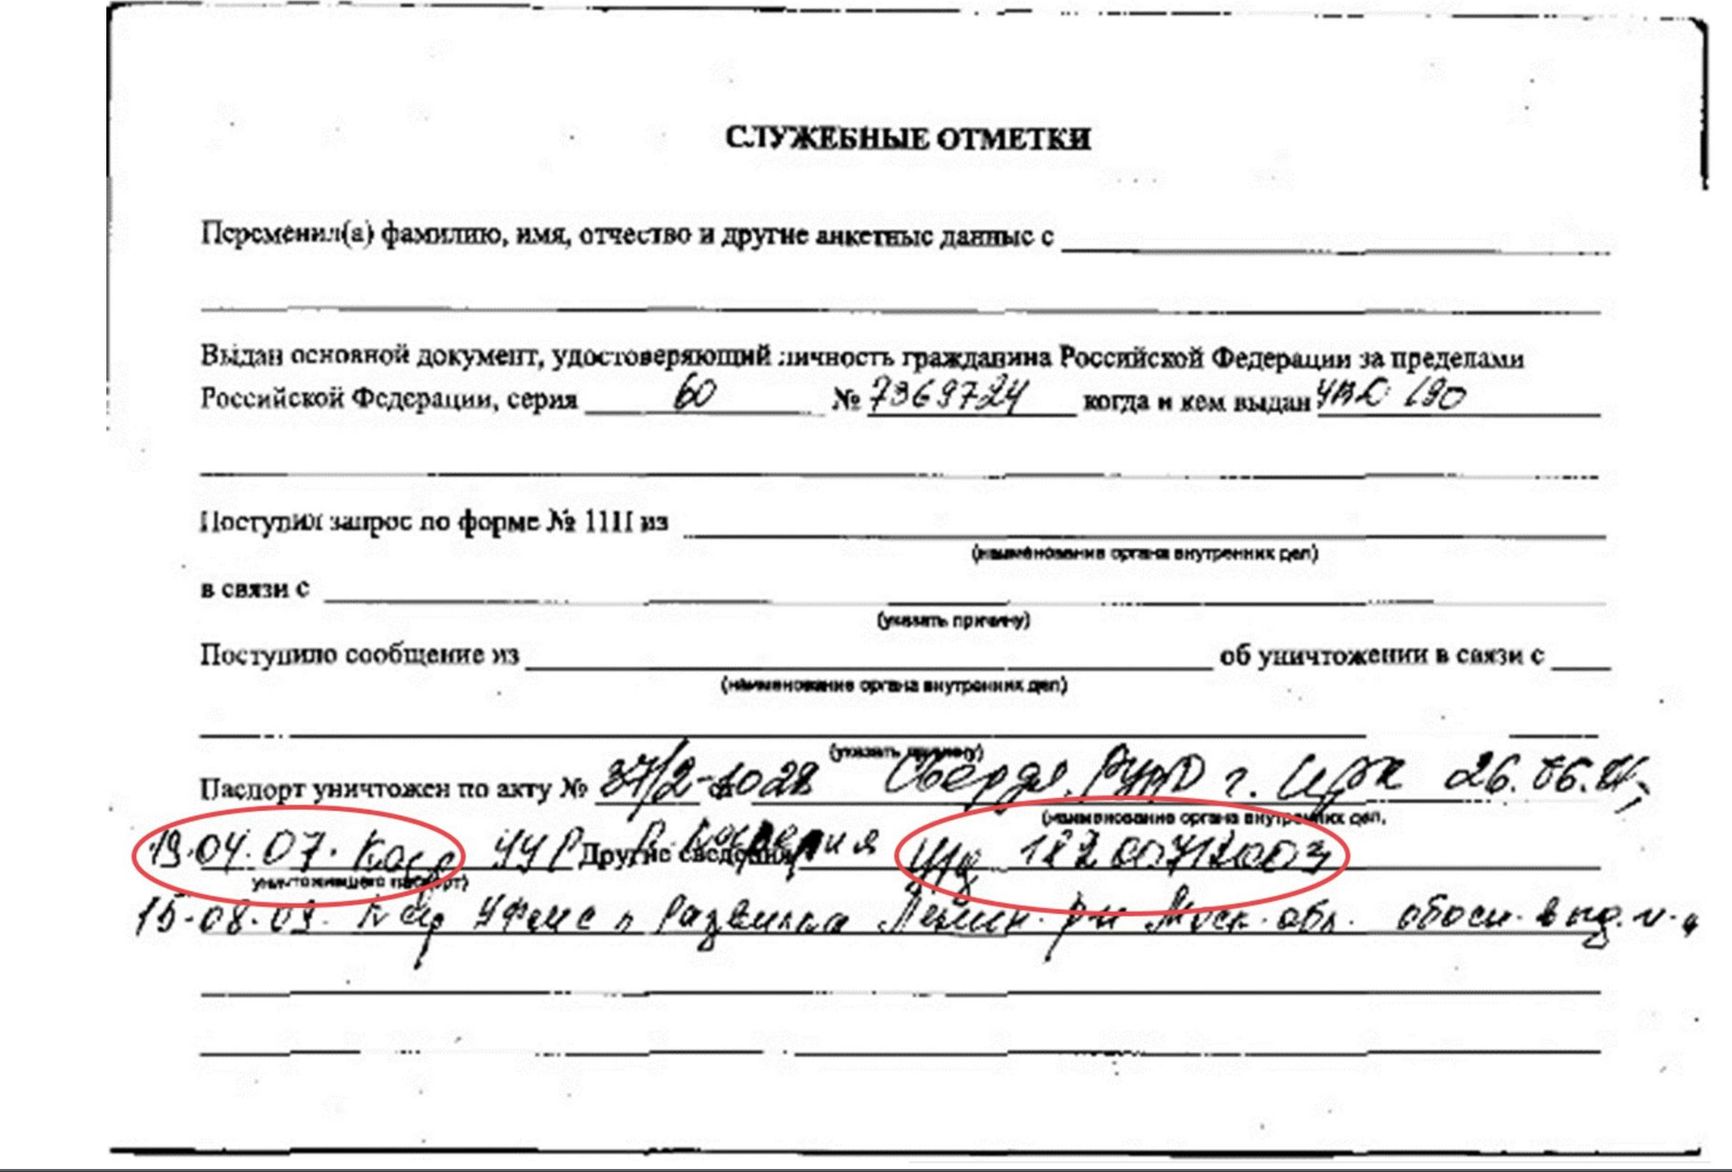 A form from Krasikov's passport file, which shows that his data was requested on April 19, 2007 in connection with criminal case #18200712003 